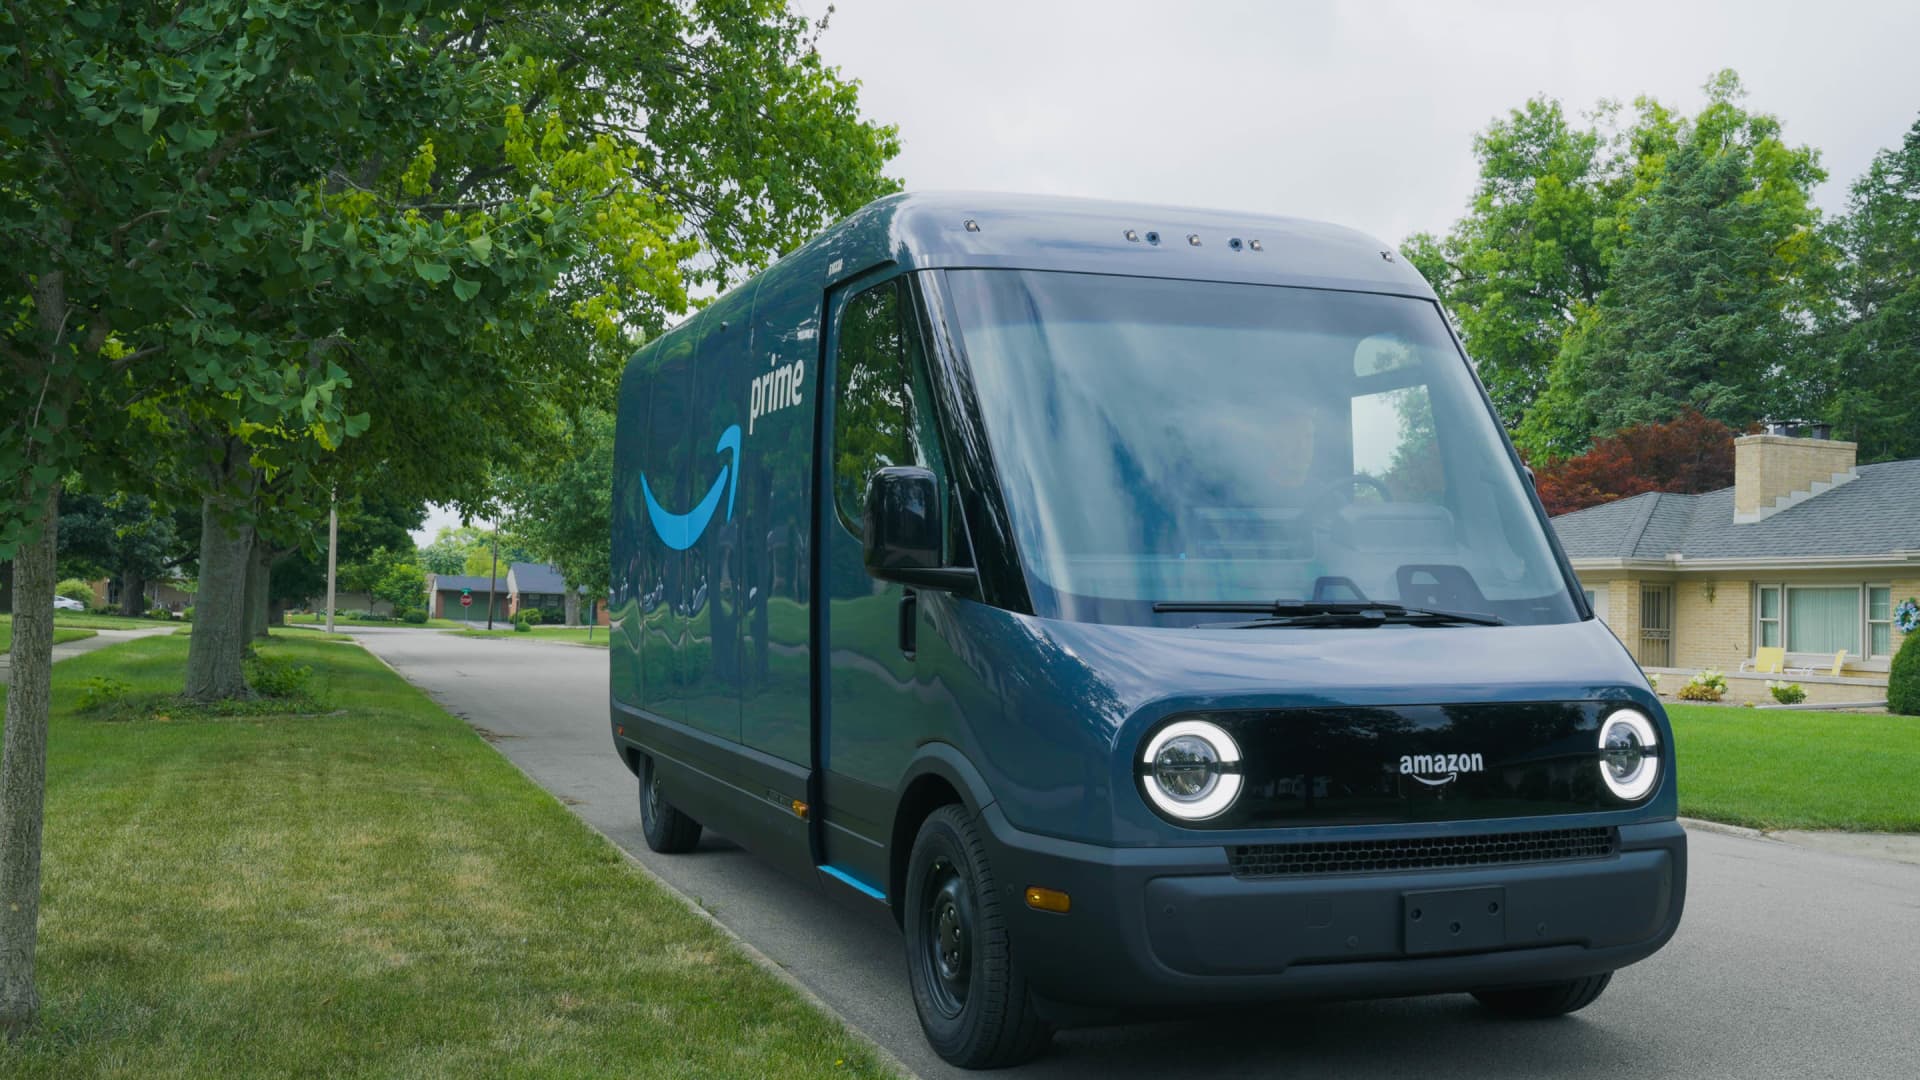 Amazon is starting to deliver packages with Rivian electric vans